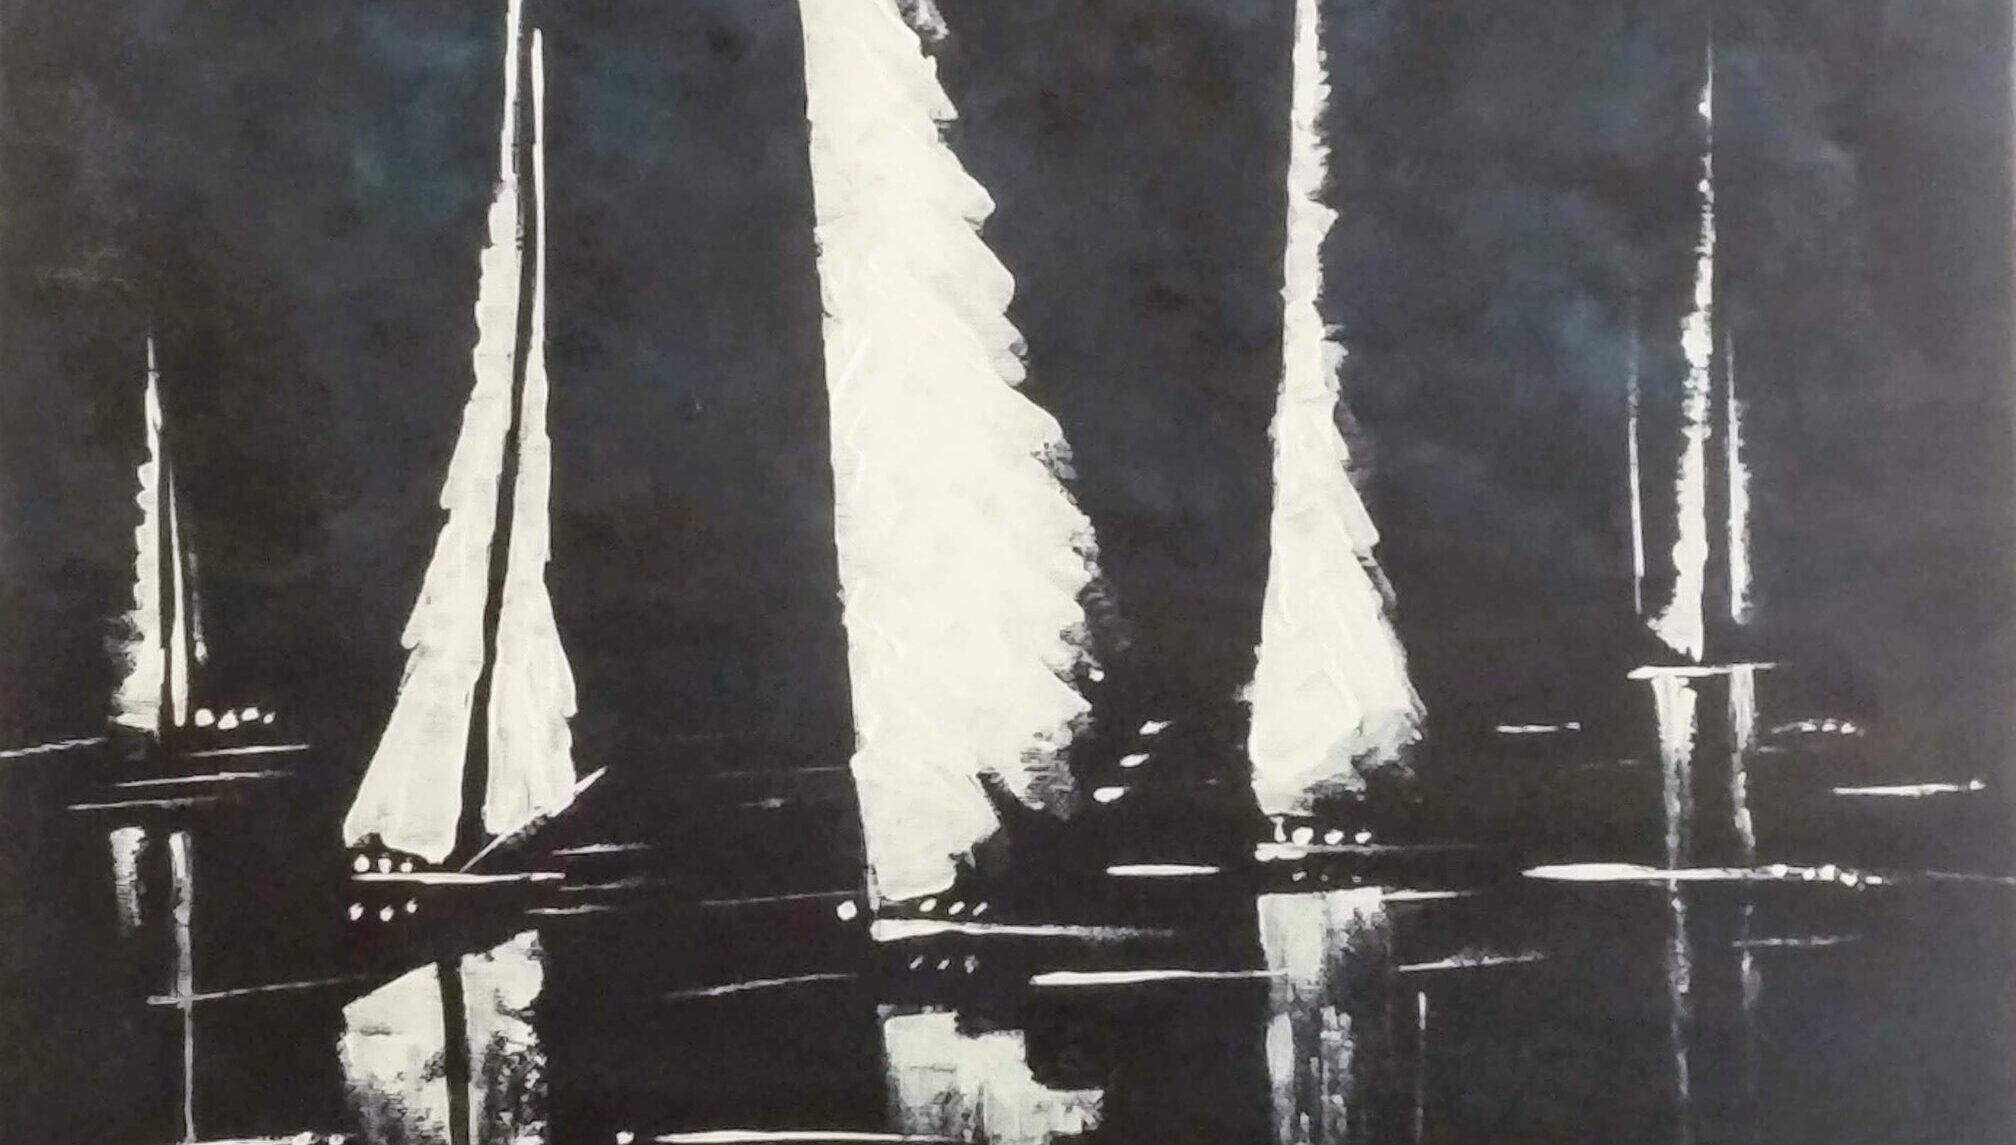 Painting of sail boats by Sucheta Jadhav for India's first solo circumnavigator Dilip Donde